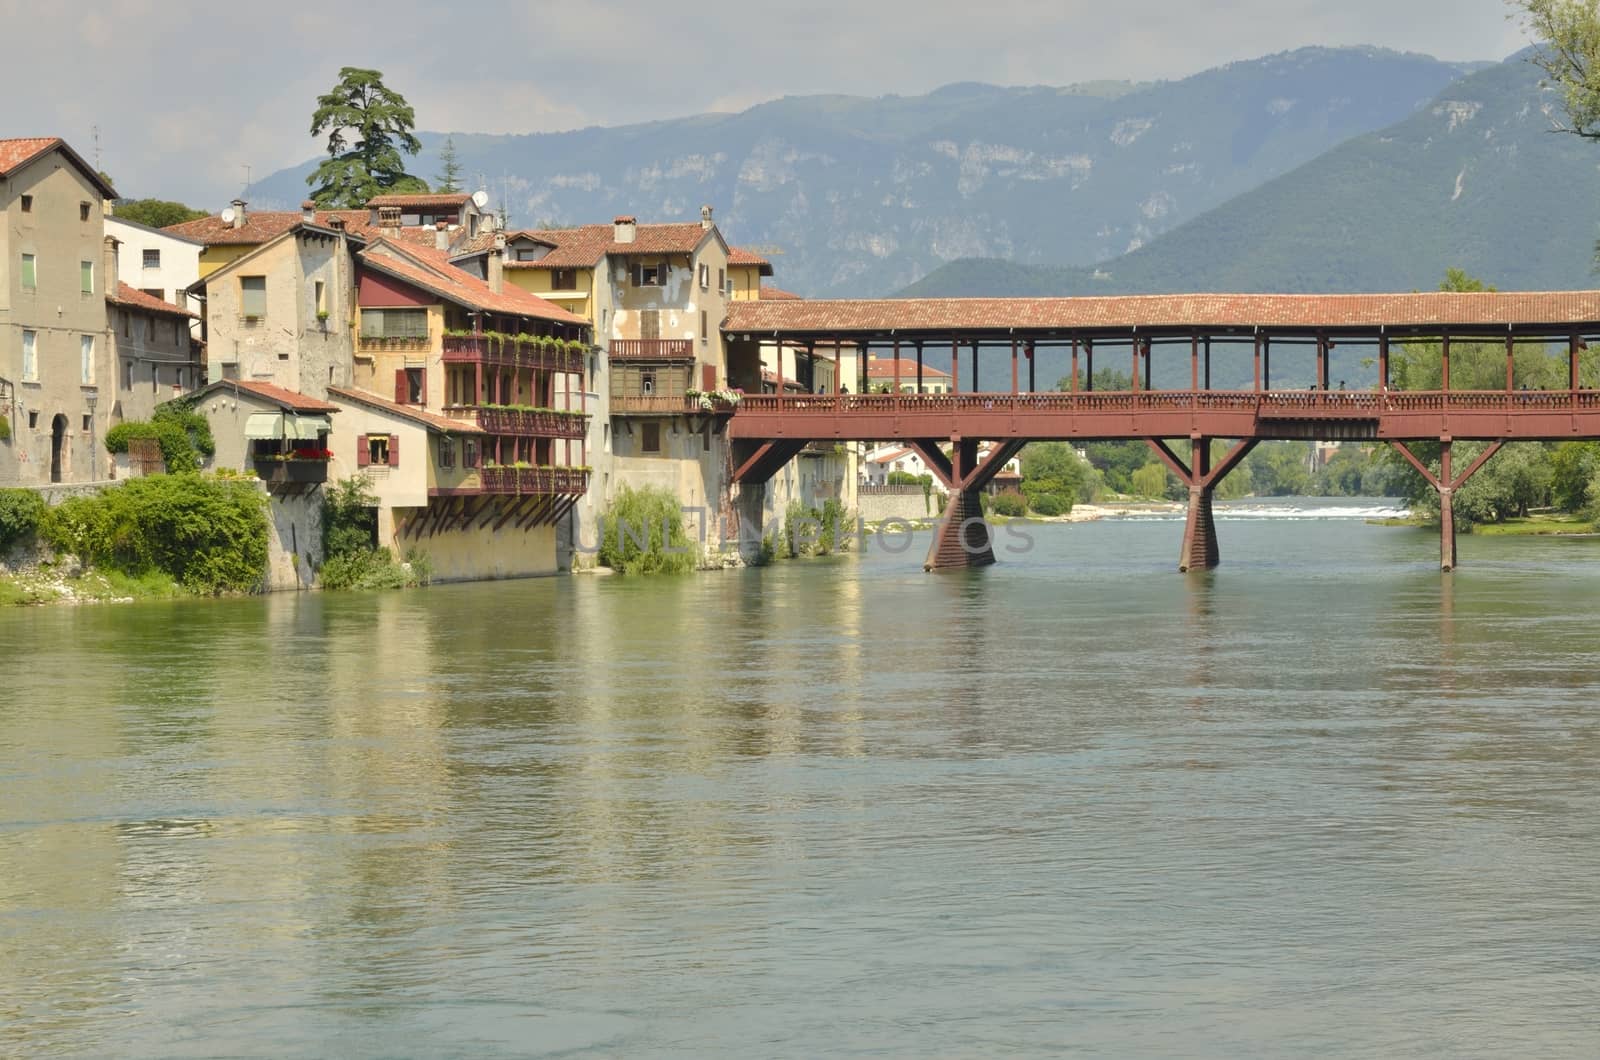 Alpini  bridge is the covered wooden pontoon bridge designed by the architect Andrea Palladio in 1569. The bridge is located in Bassano del Grappa, Italy  and was destroyed many times, the last time in World War II. The bridge spans the river Brenta.
